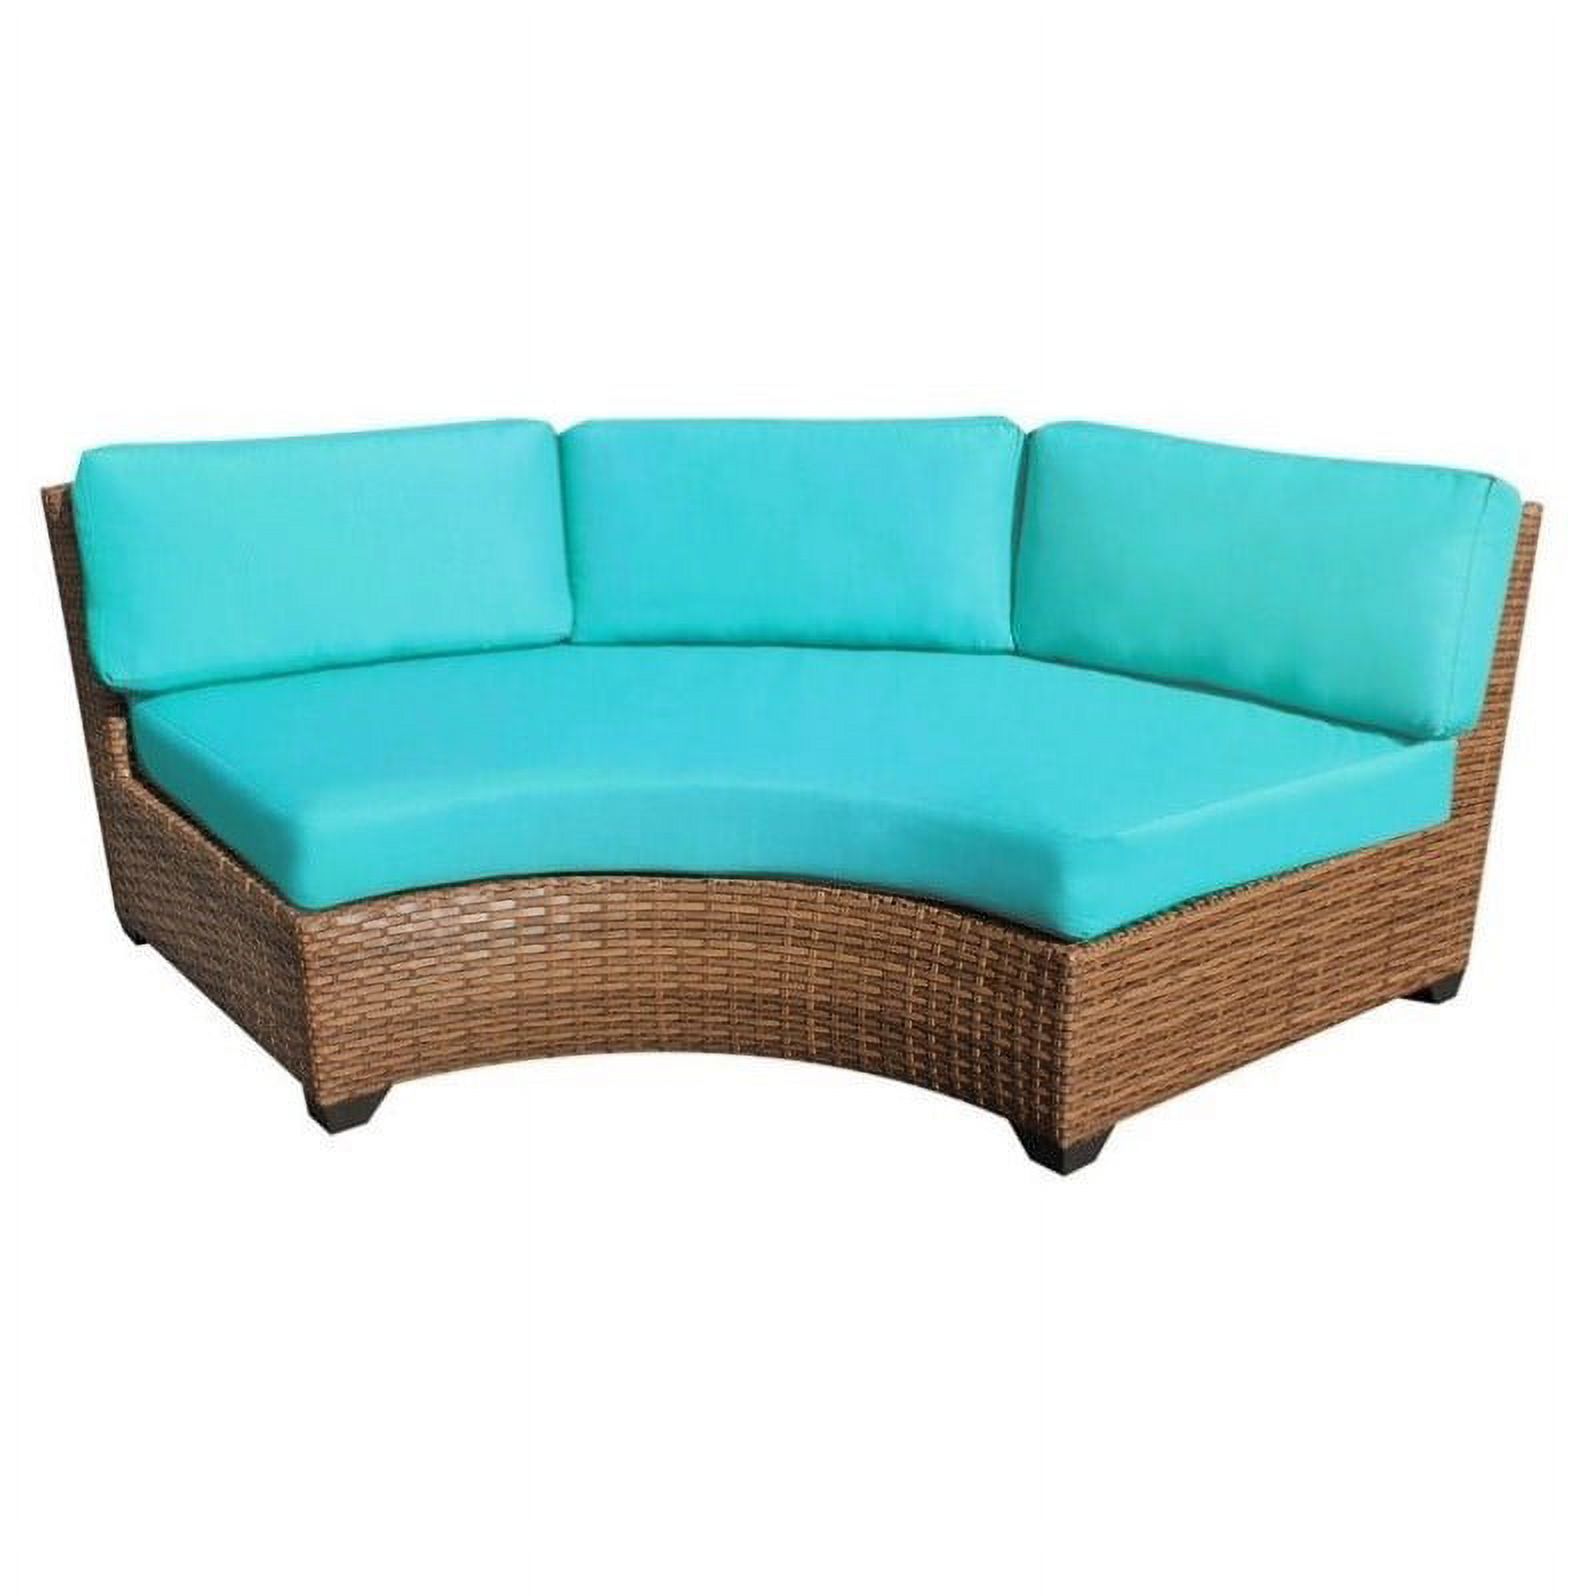 Set of 2 Outdoor Wicker Curved Sofa and Coffee Table in Aruba Blue - image 2 of 5